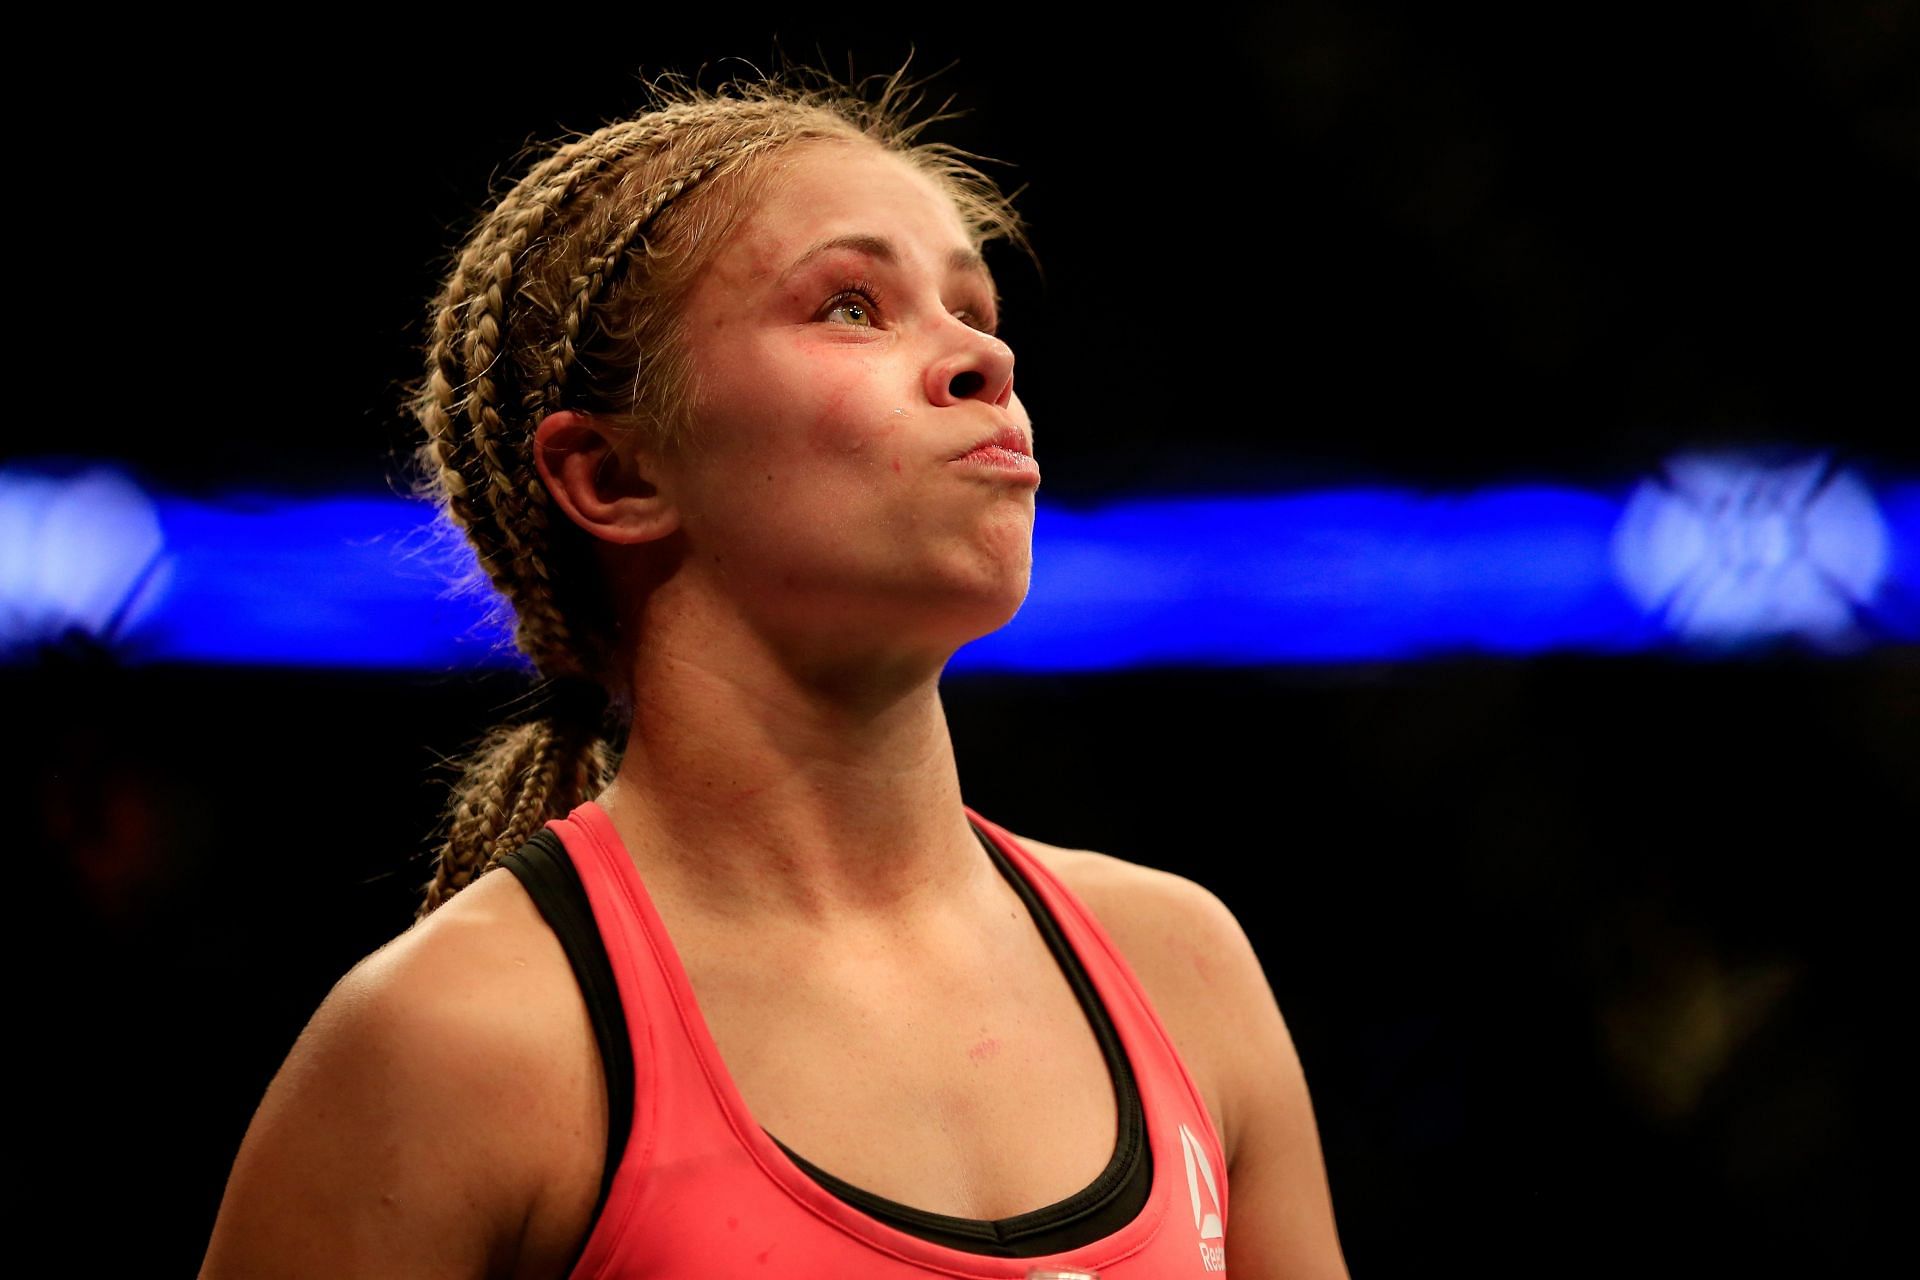 Paige VanZant has a professional record of 8-5